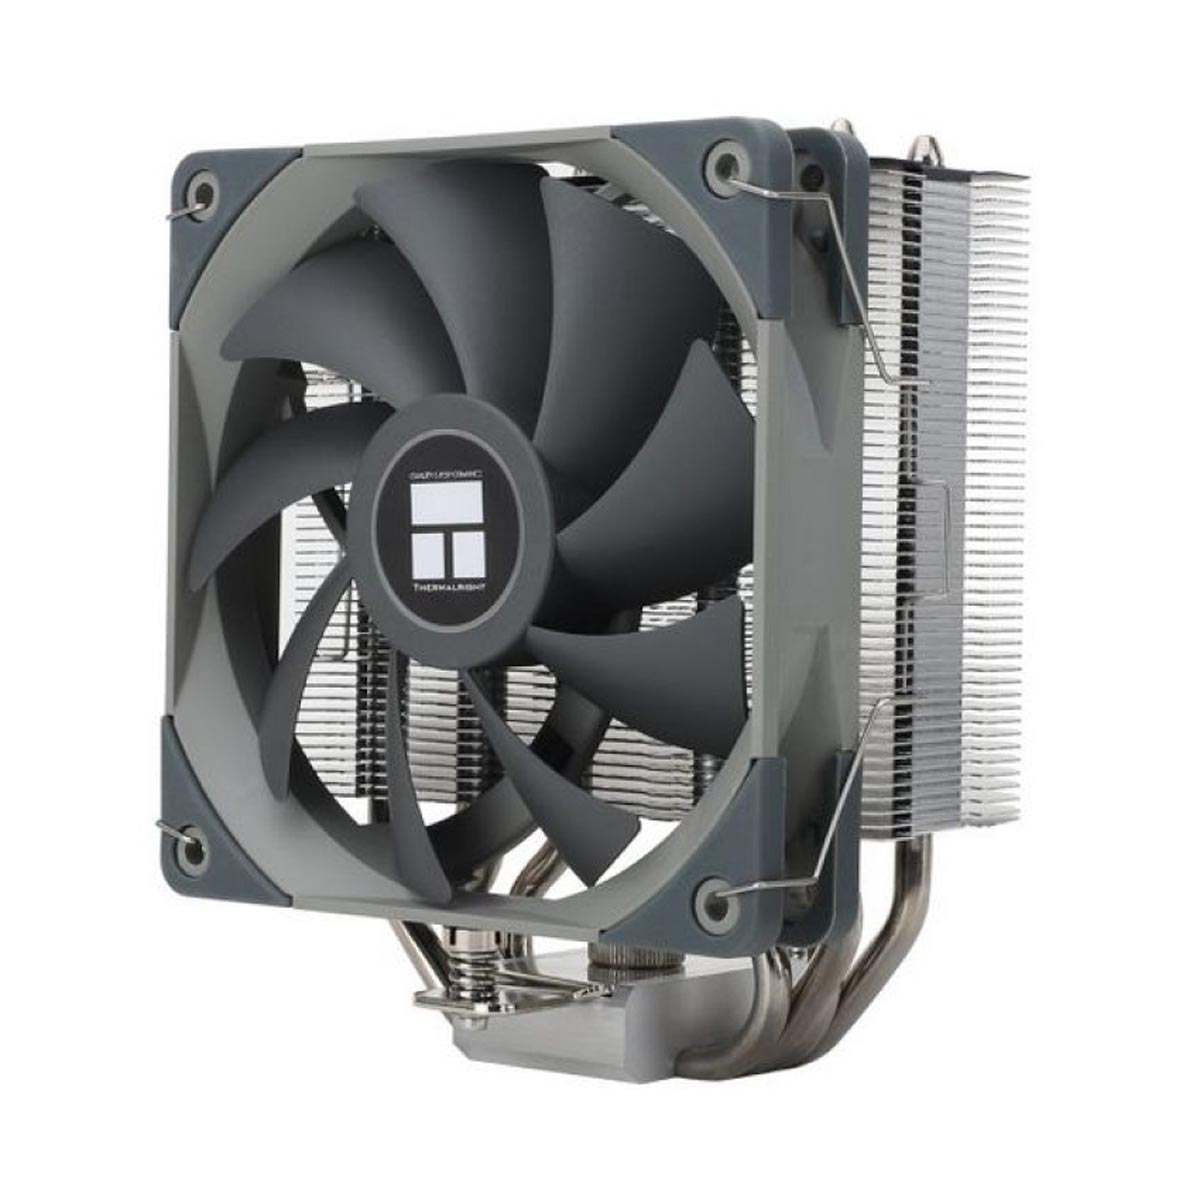 Tản nhiệt khí Thermalright Assassin X 120 REFINED SE